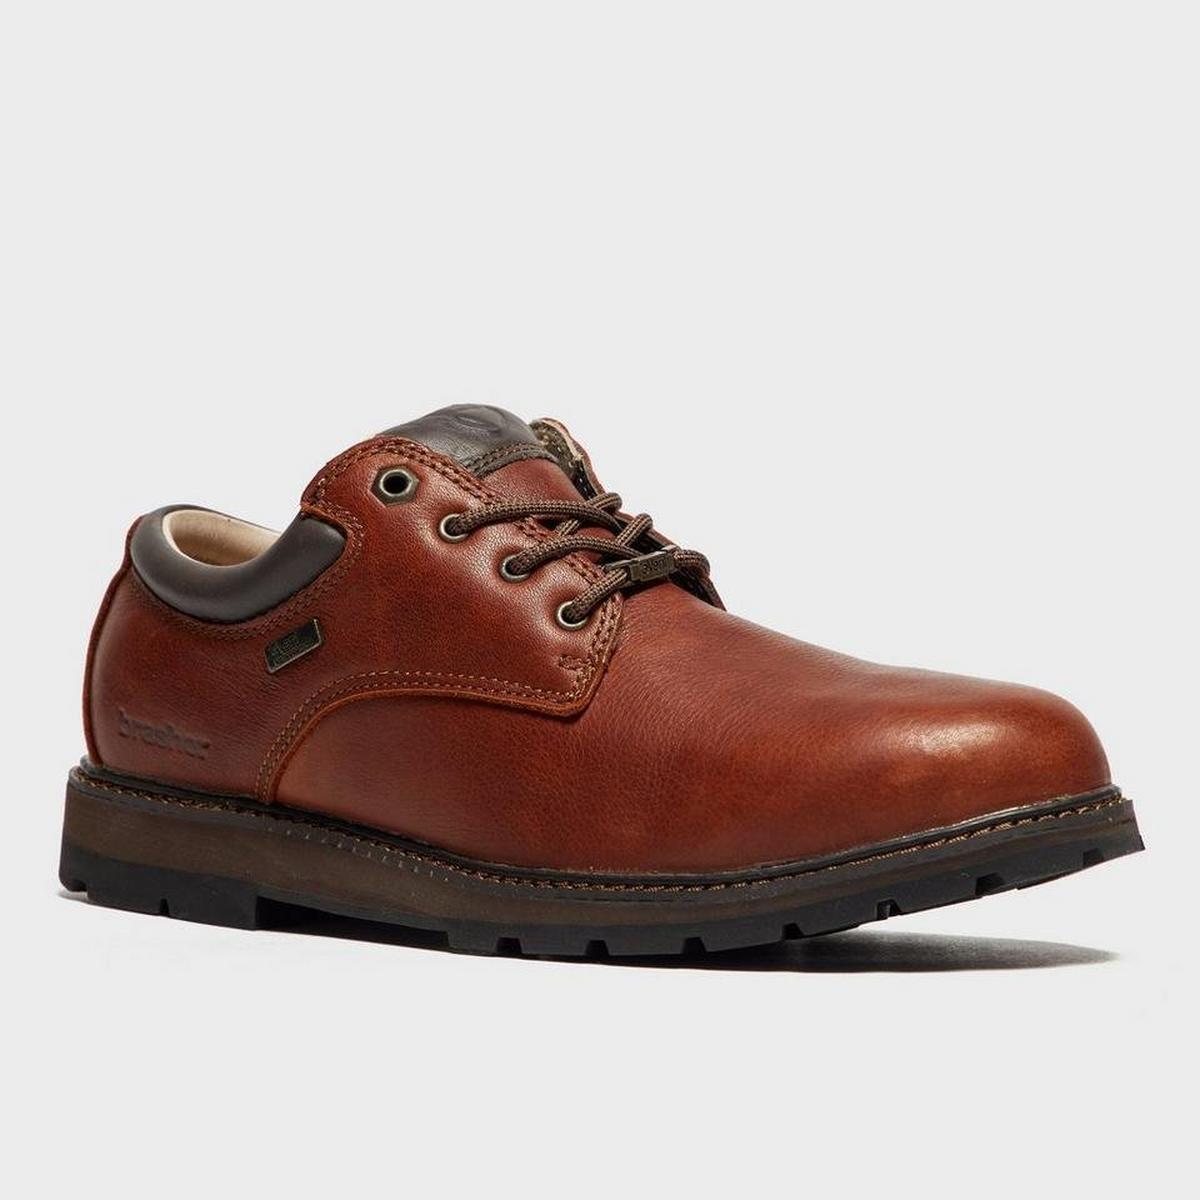 Brasher Men's Country Classic Shoe - Brown